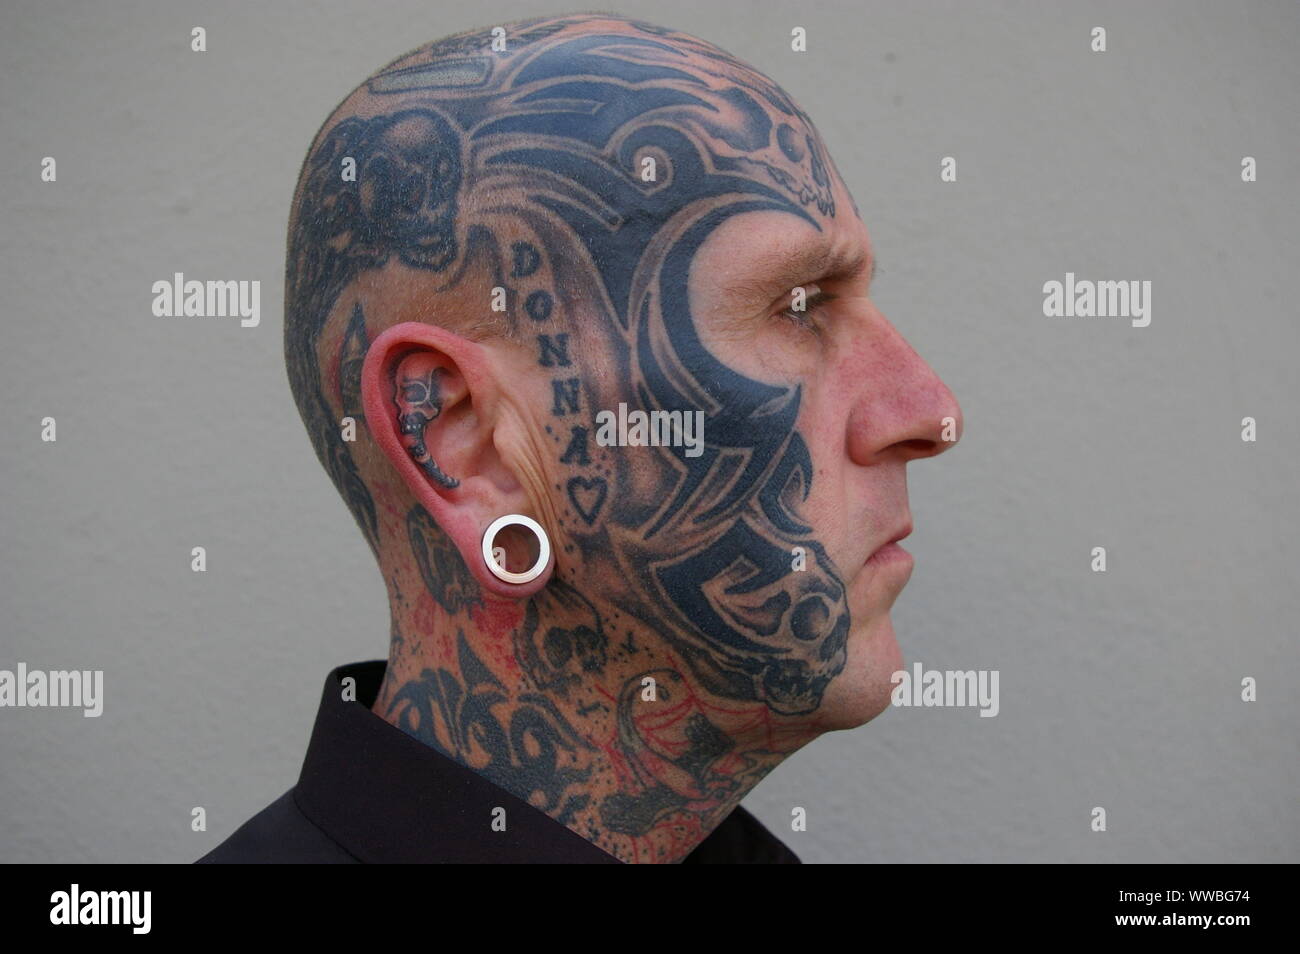 Security guard with body art on his face. Stock Photo